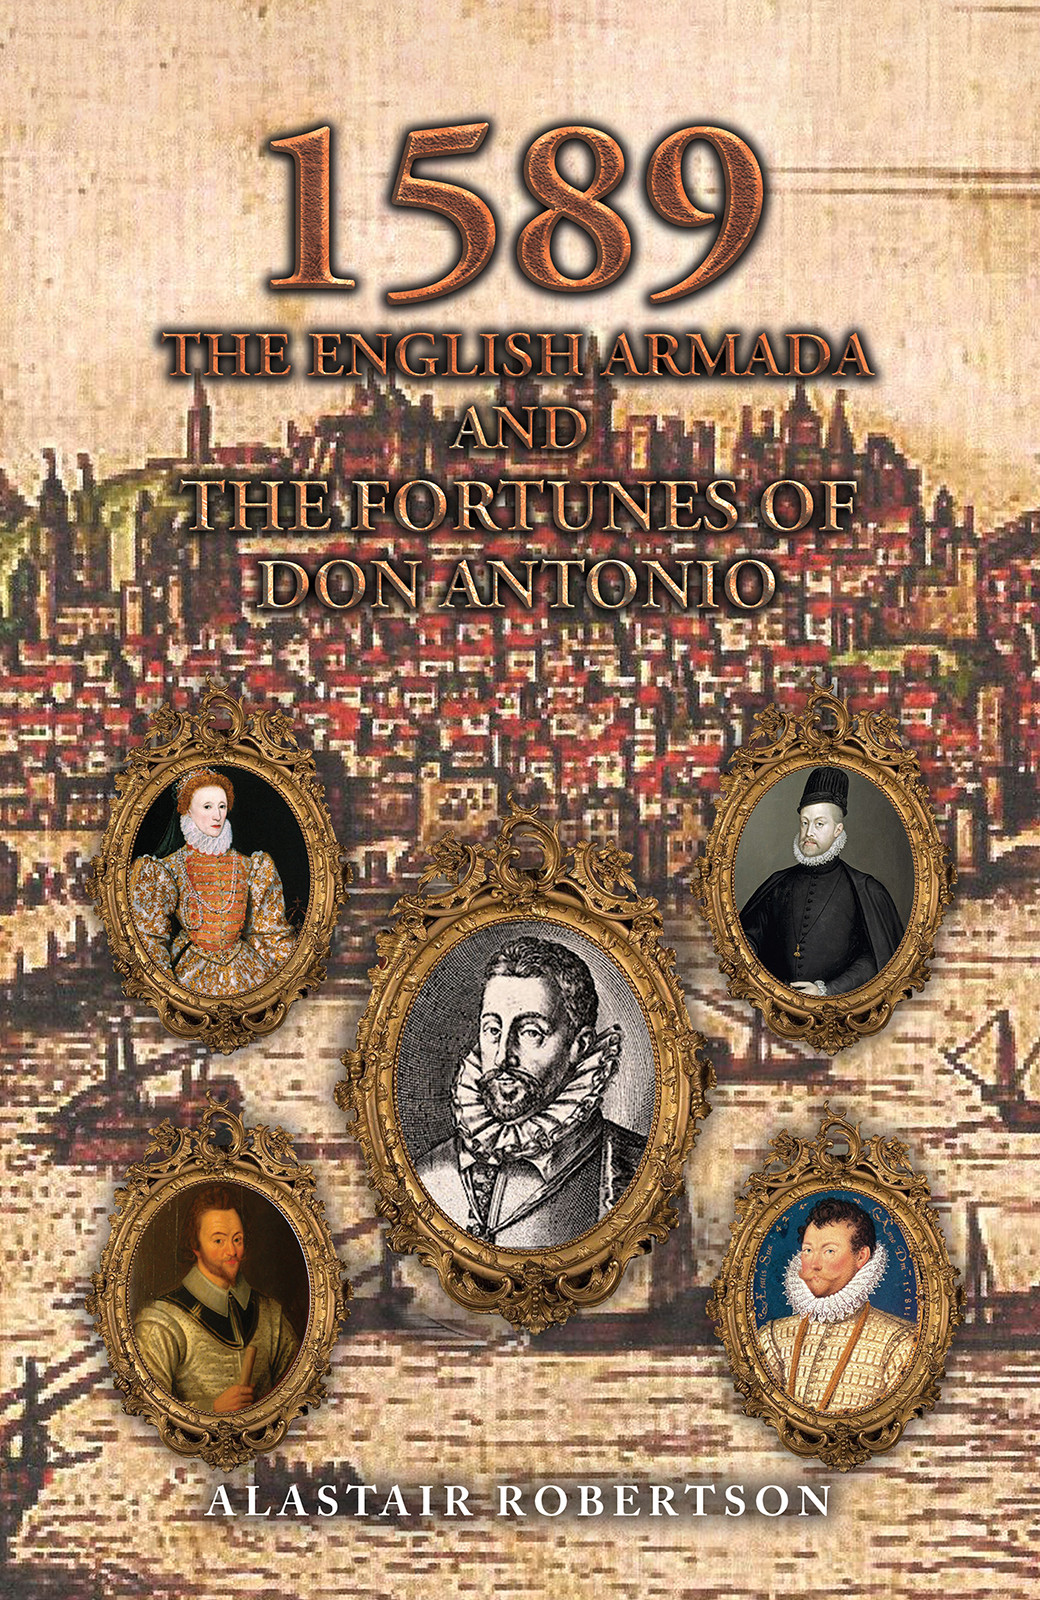 1589 – The English Armada and the Fortunes of Don Antonio